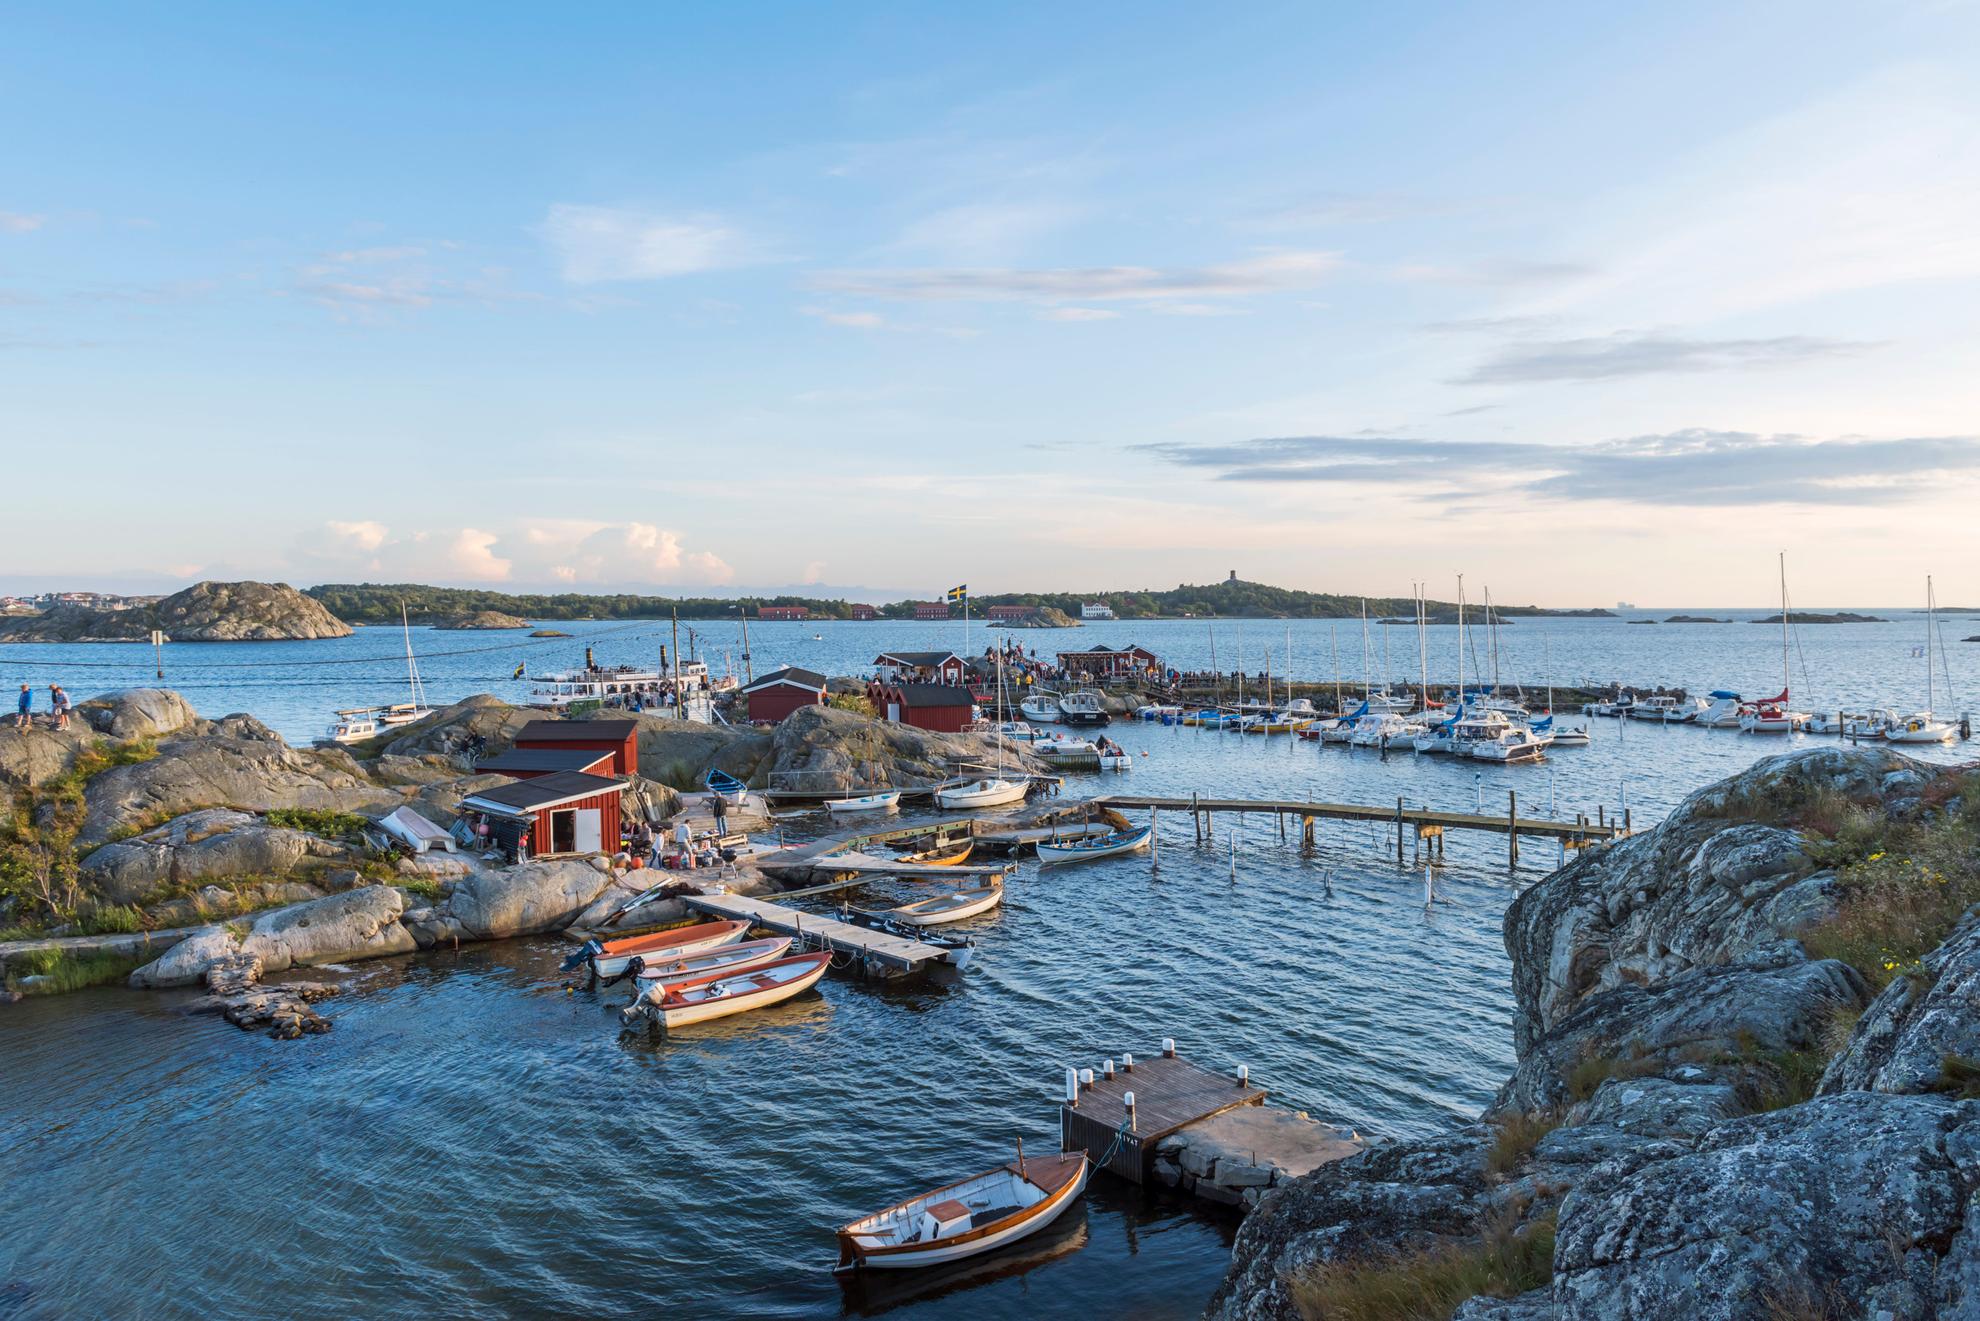 The island of Brännö in the Gothenburg archipelago with boats, rocky cliffs, and piers, red small houses, a Swedish flag, and people in the sun.